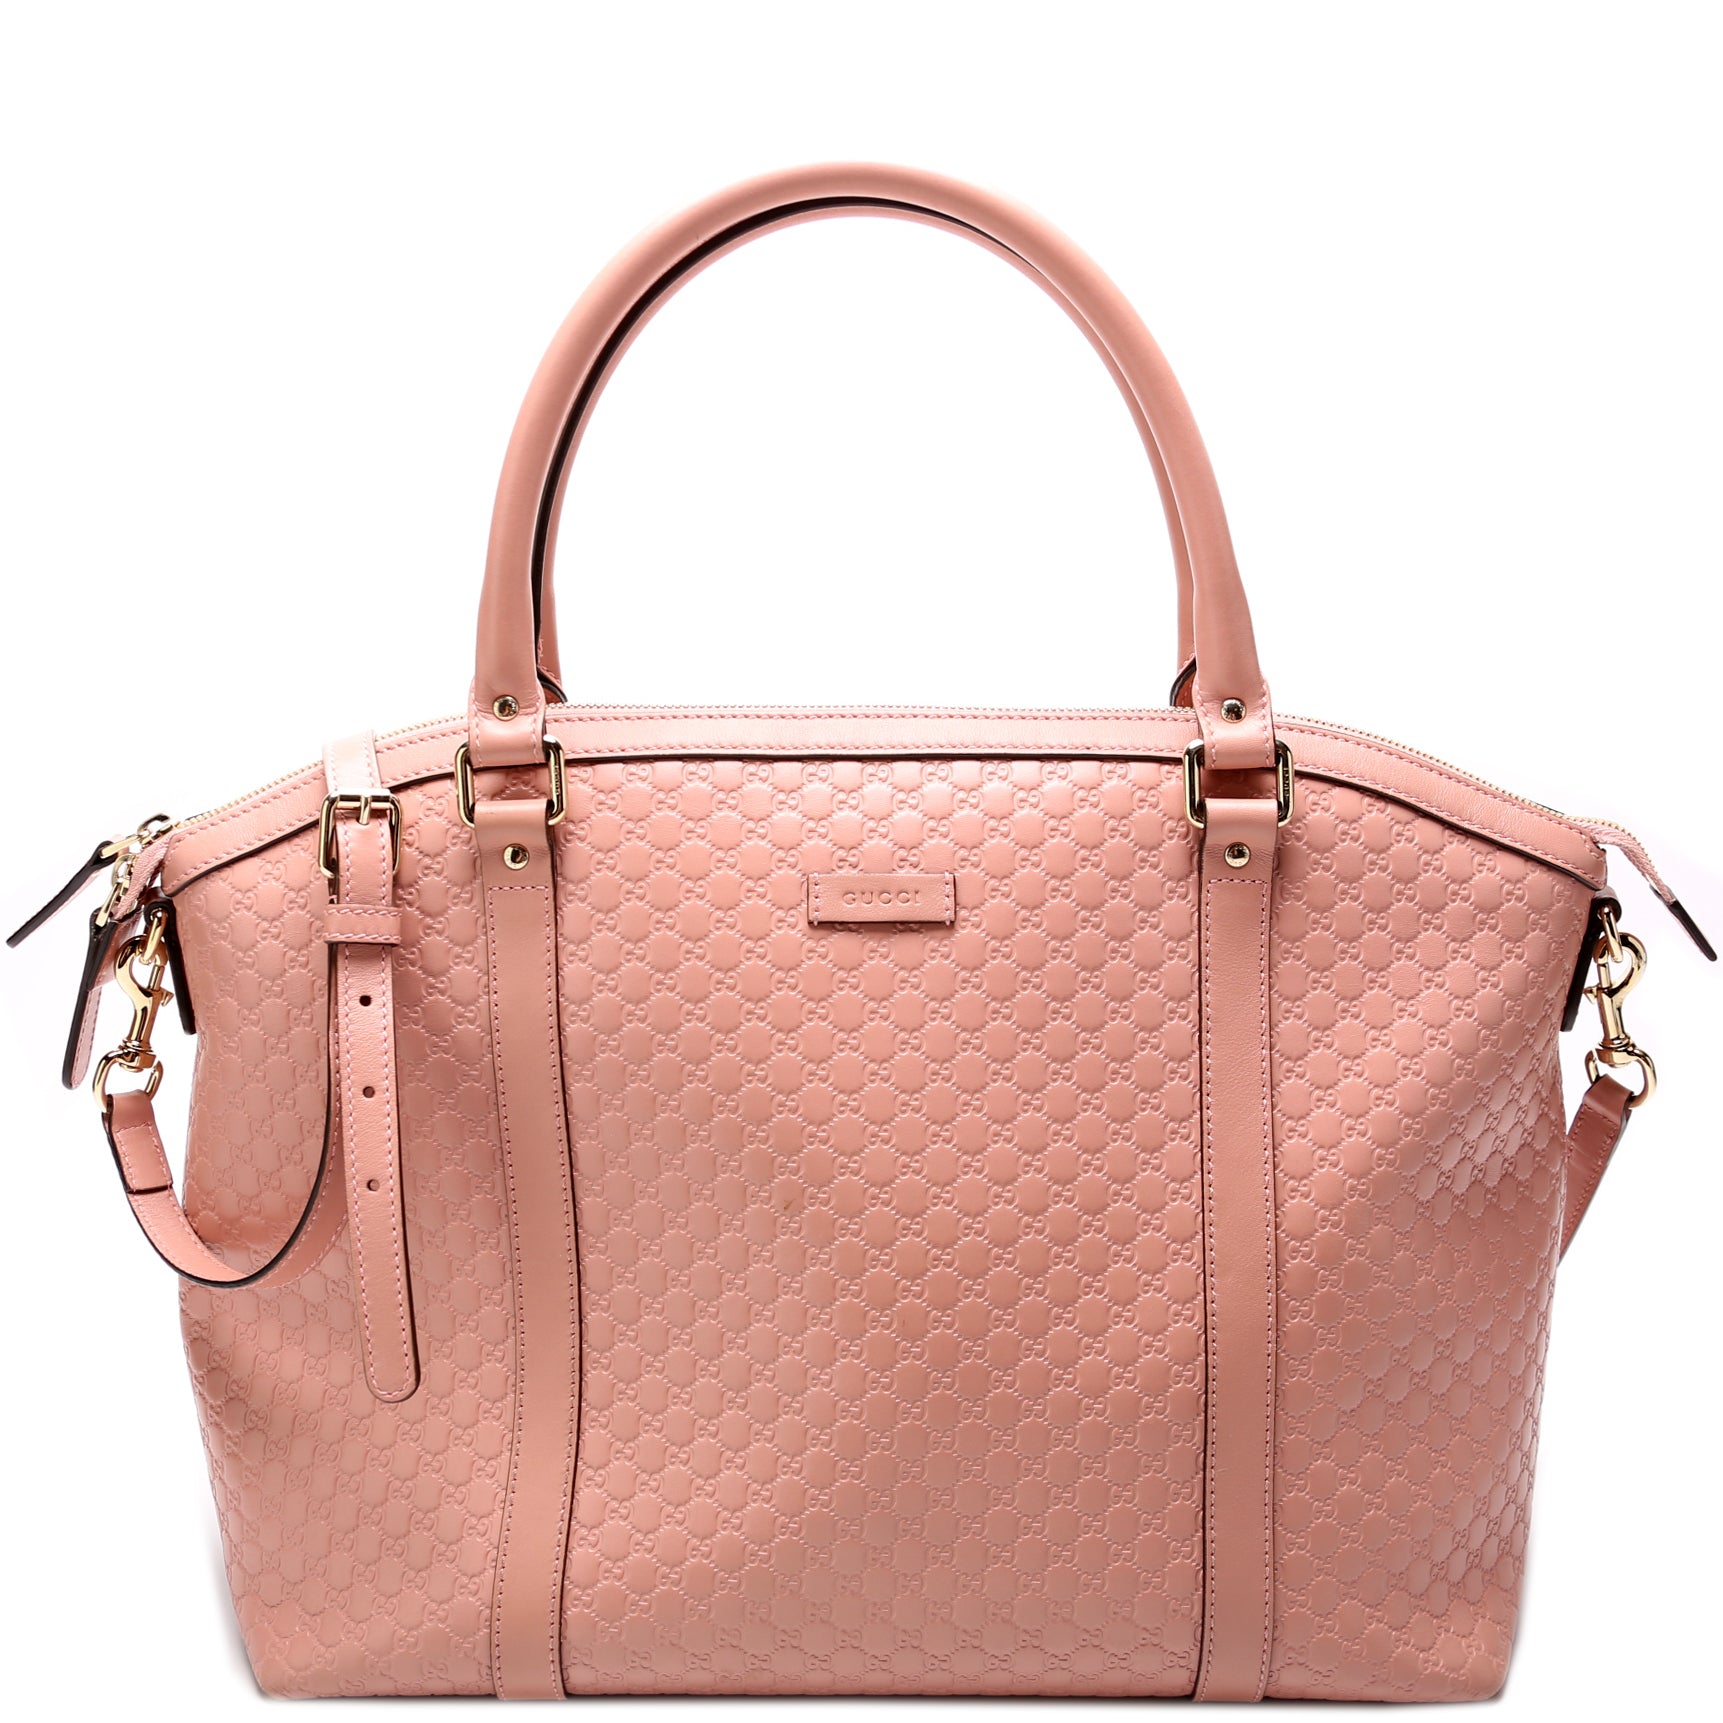 GUCCI Dome Large Microguccissima Leather Satchel Bag Soft Pink 449658